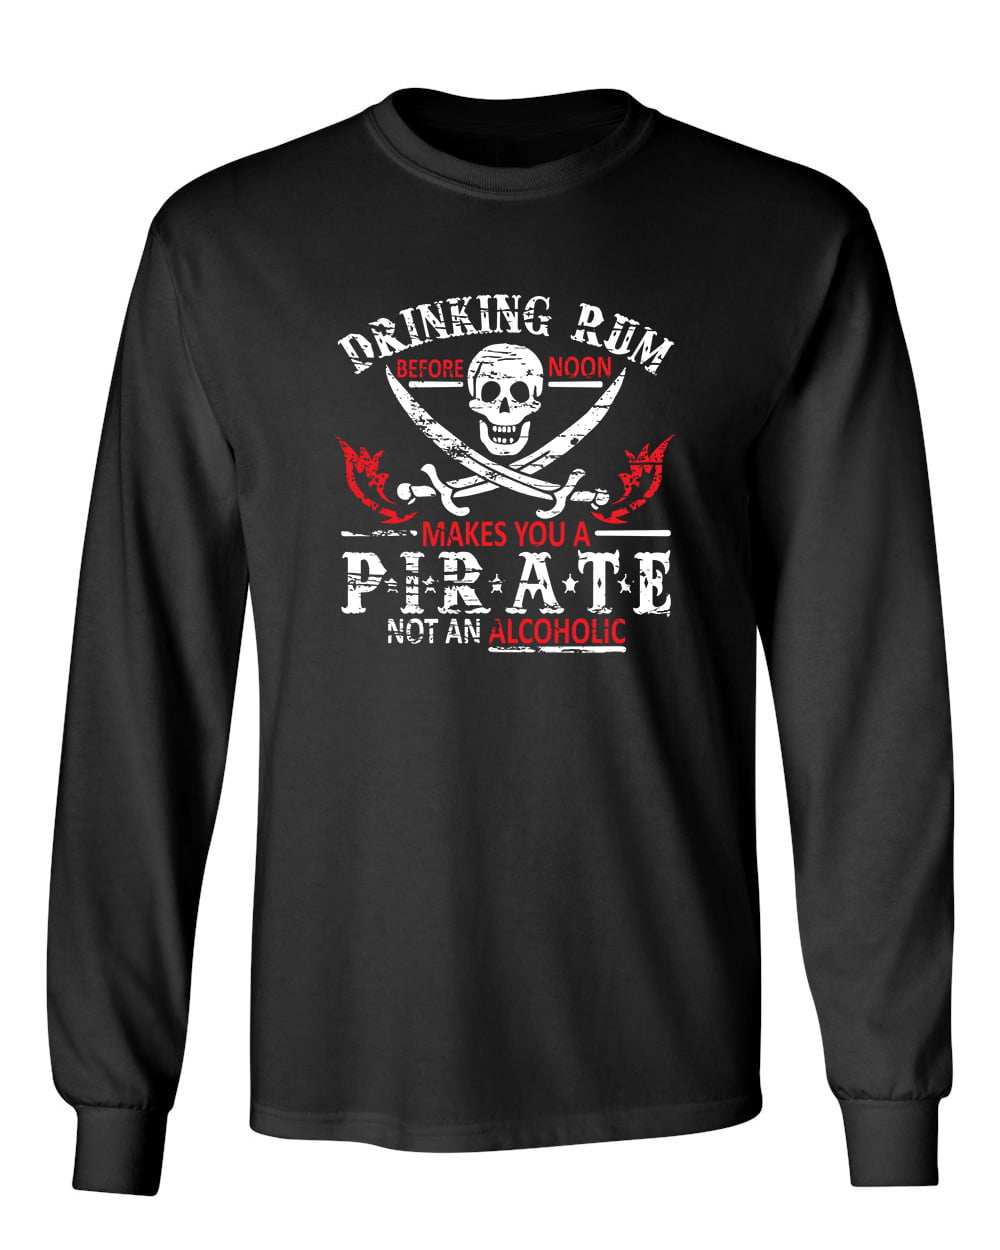 Drinking Rum Before Noon Makes You A PIRATE Not An Alcoholic Men's Cotton T-Shirt